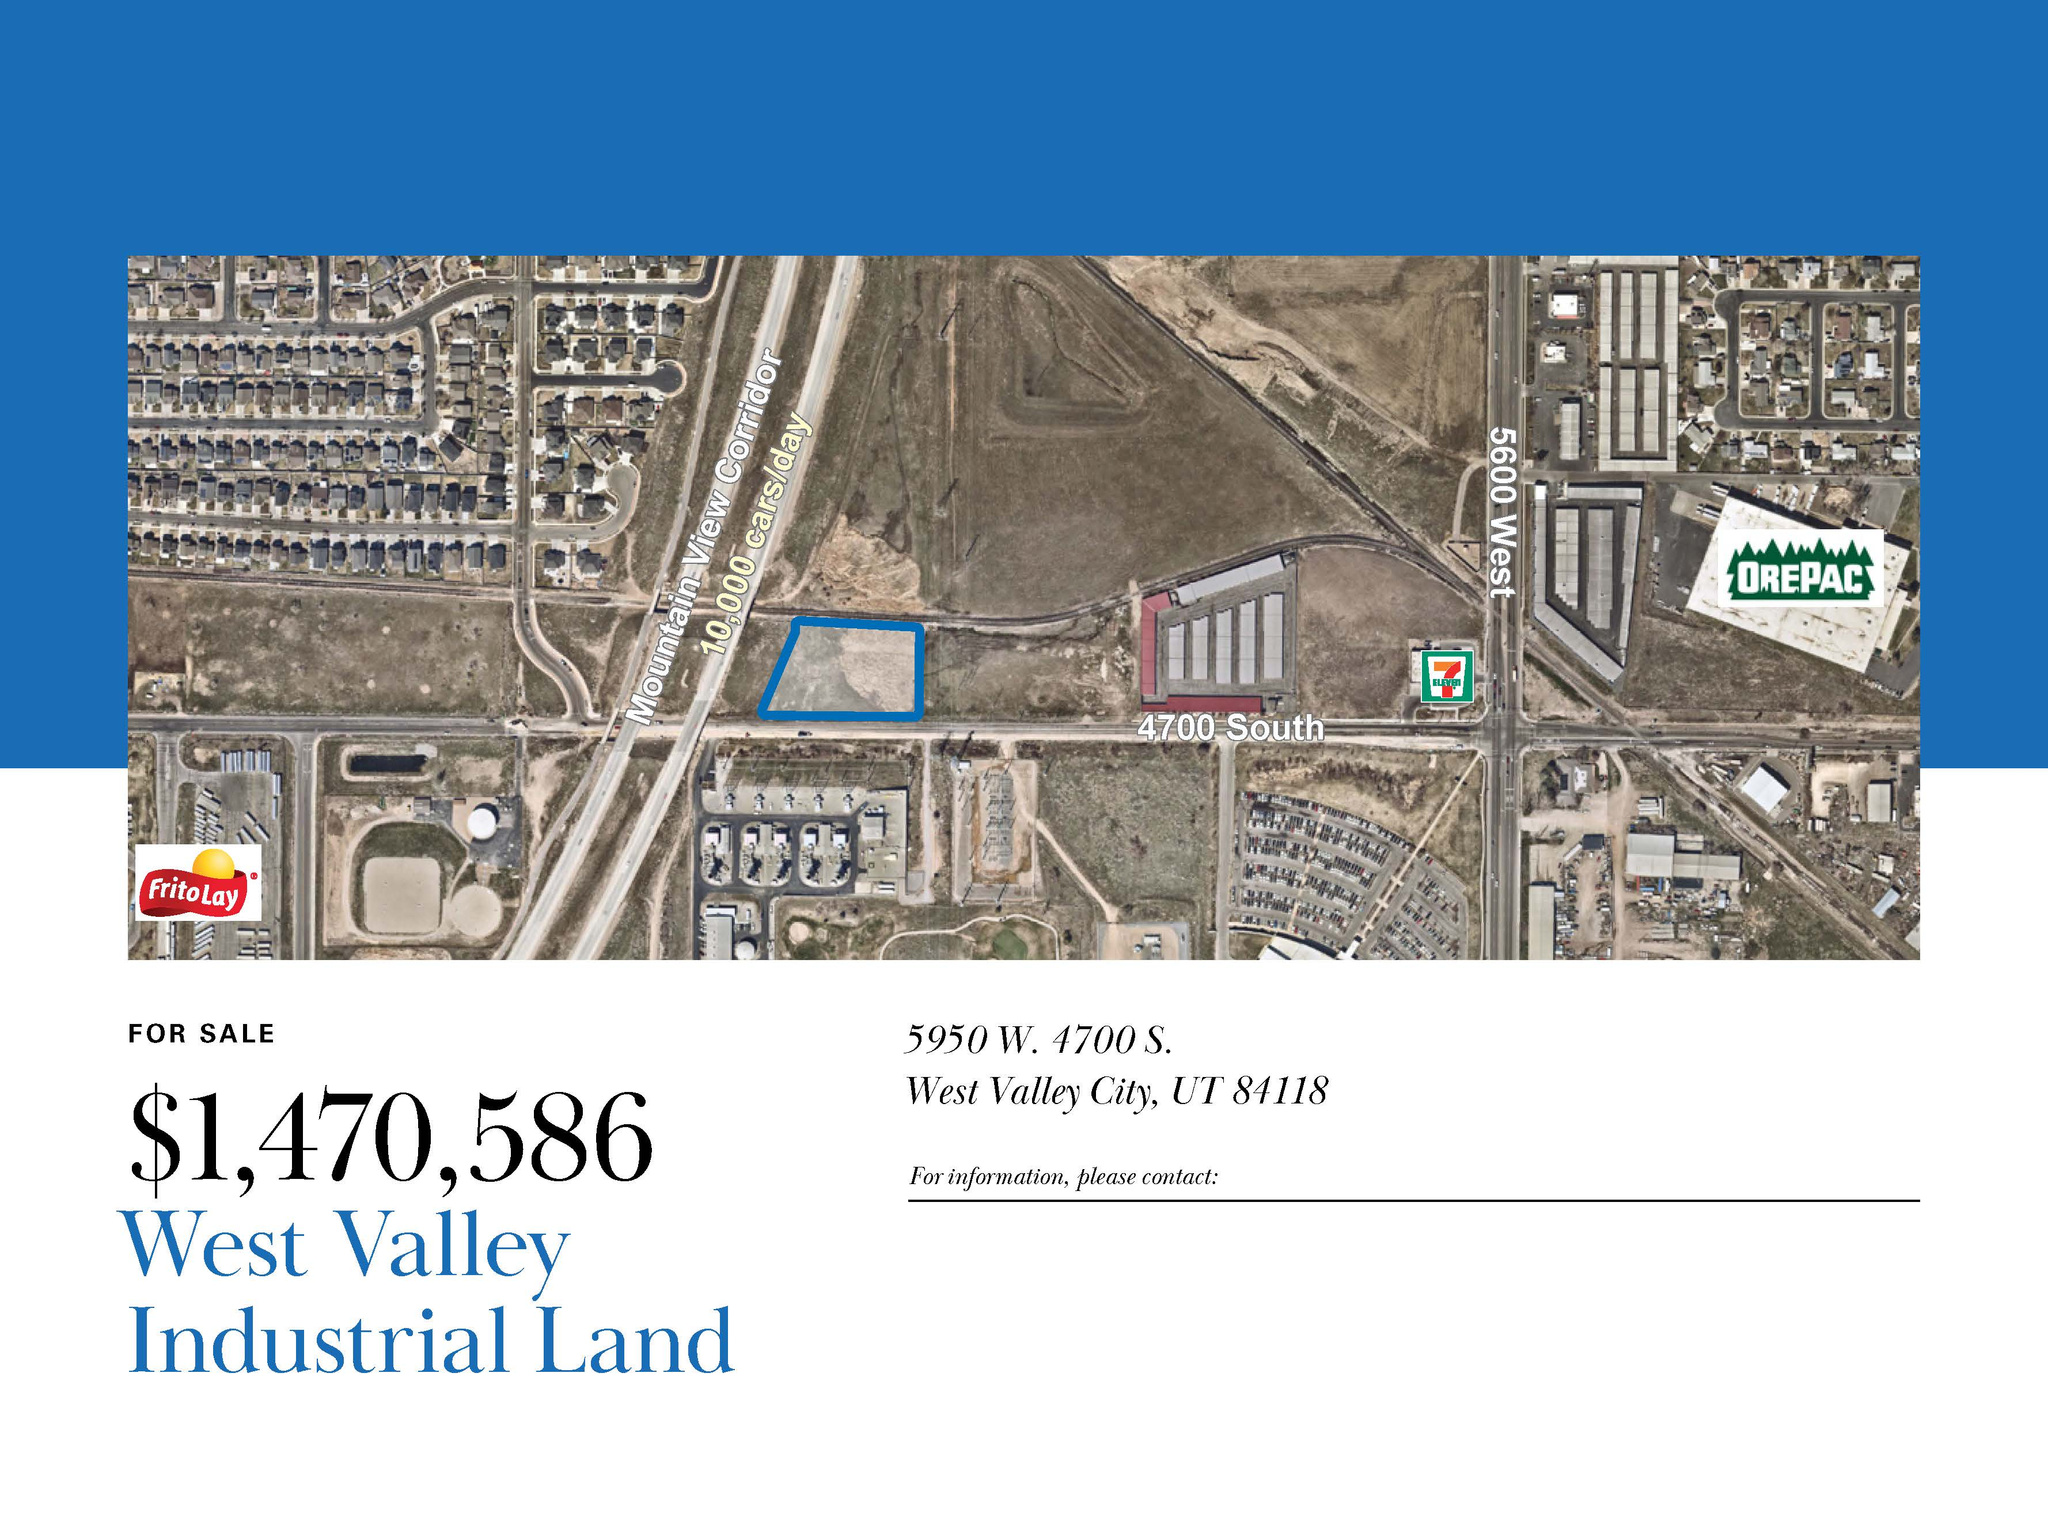 5950 W 4700 S, West Valley City, Utah 84118, ,Land,For sale,4700,1965829